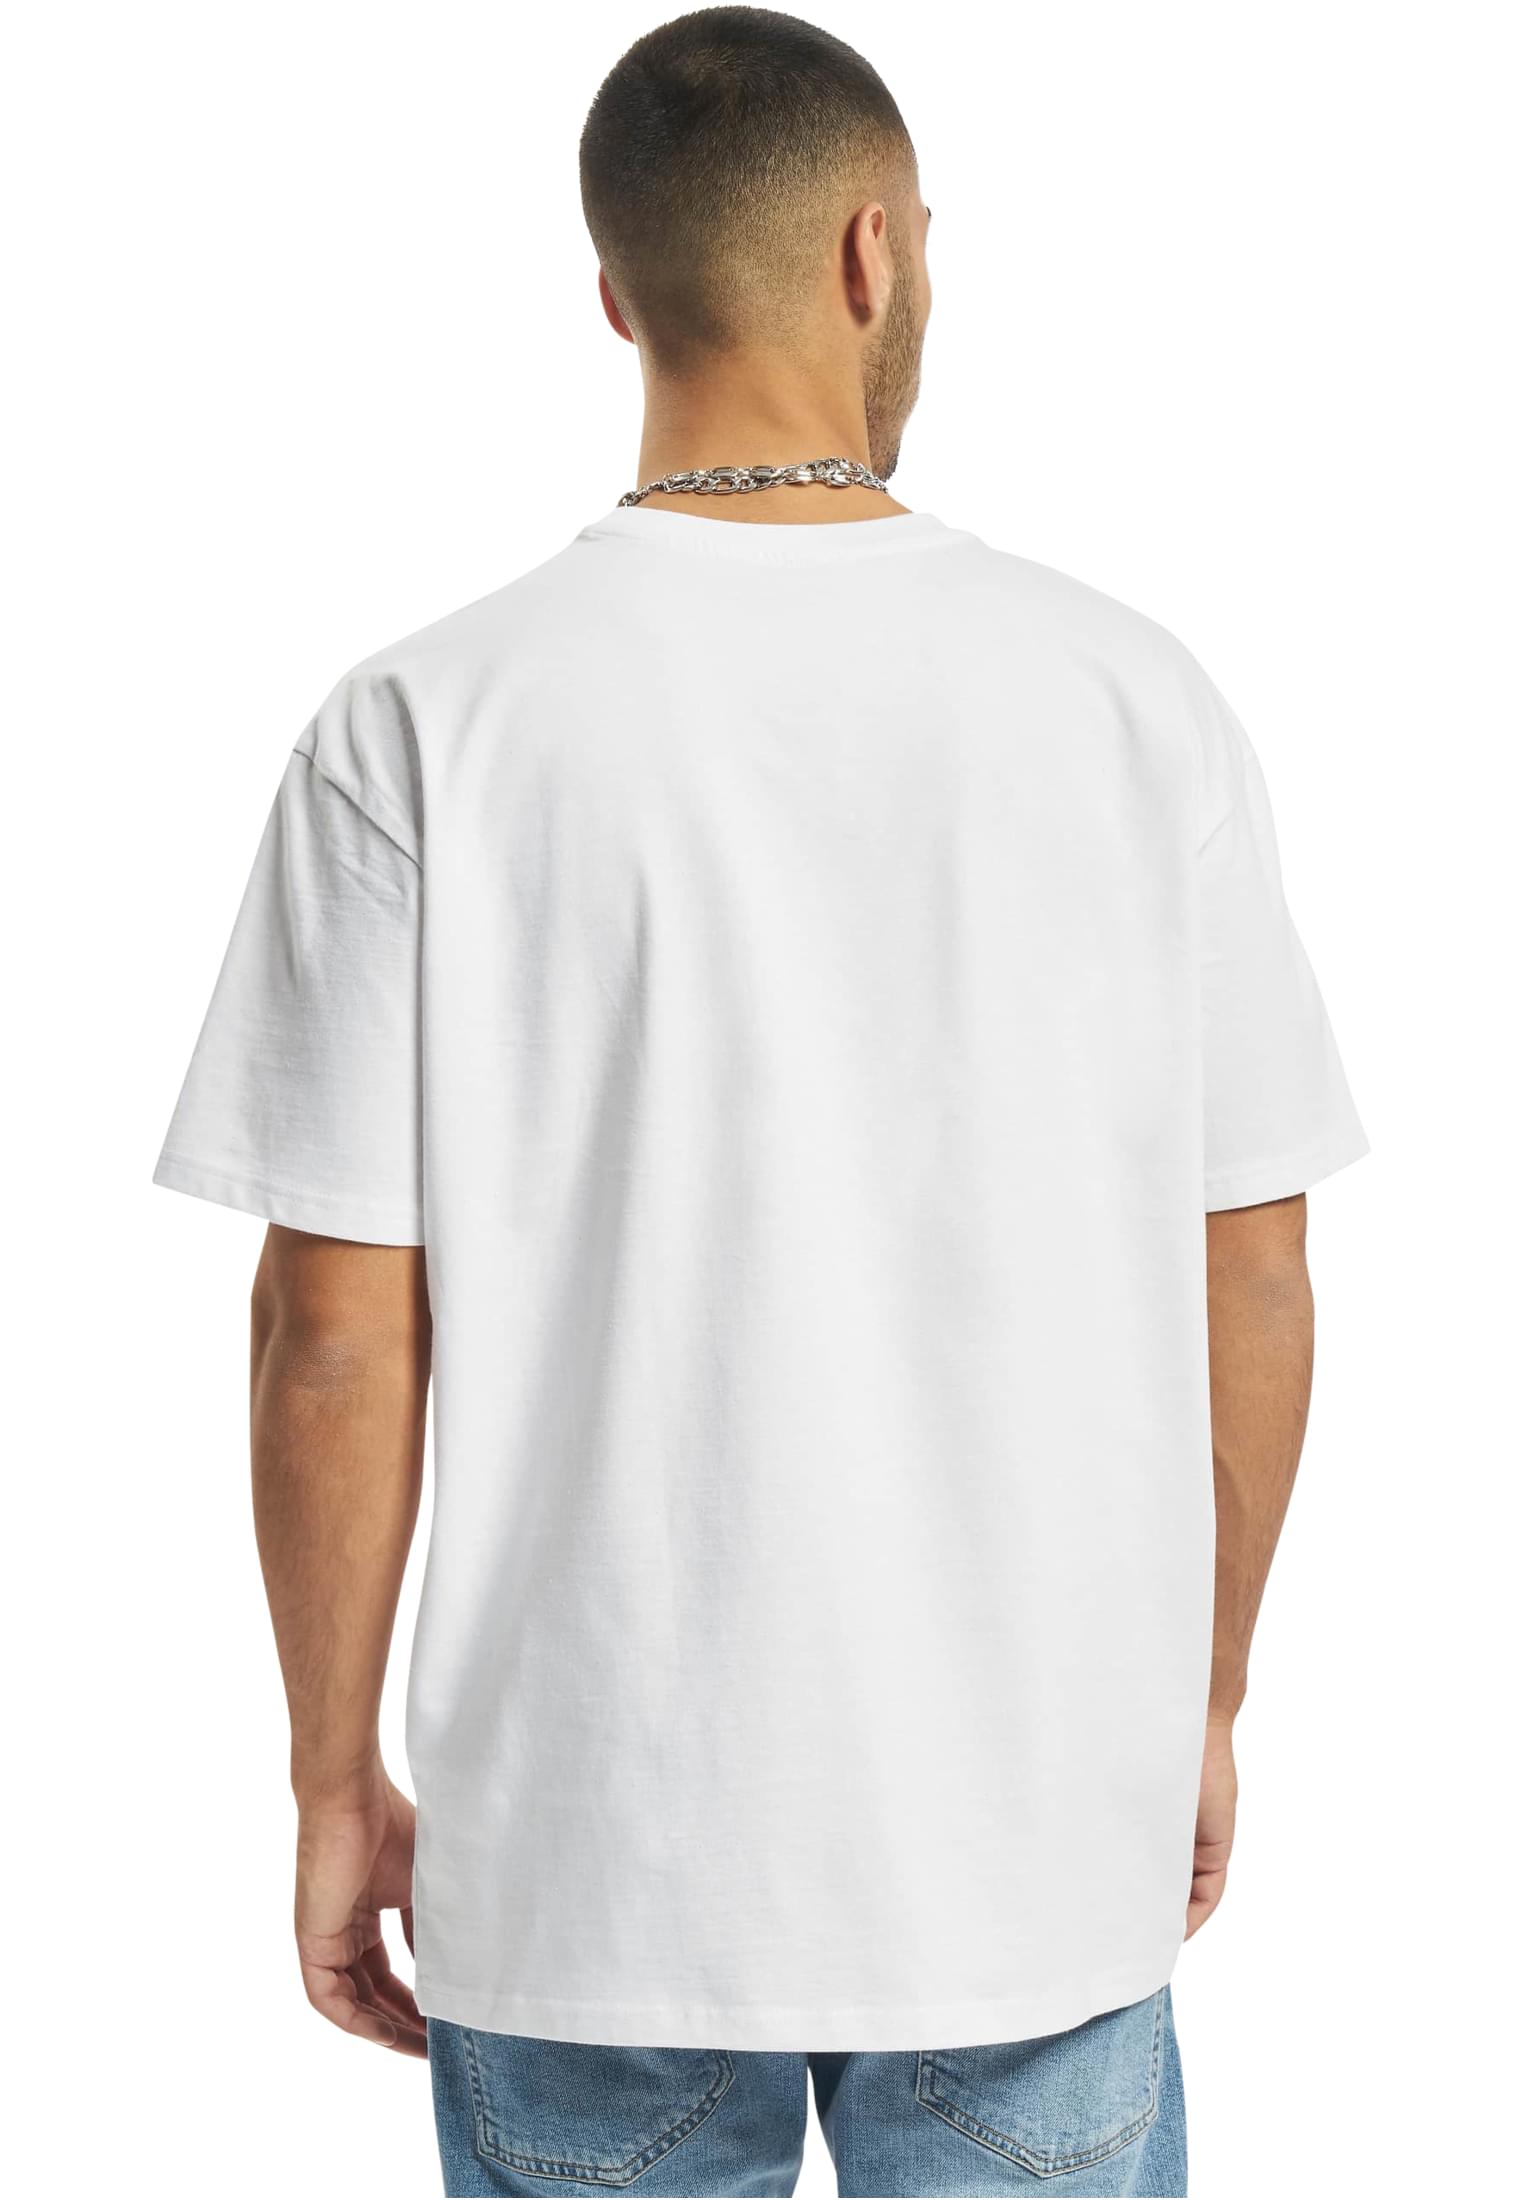 Upscale Studios Days Before Summer Oversize T-Shirt white im BAWRZ® One Stop Hip-Hop Shop